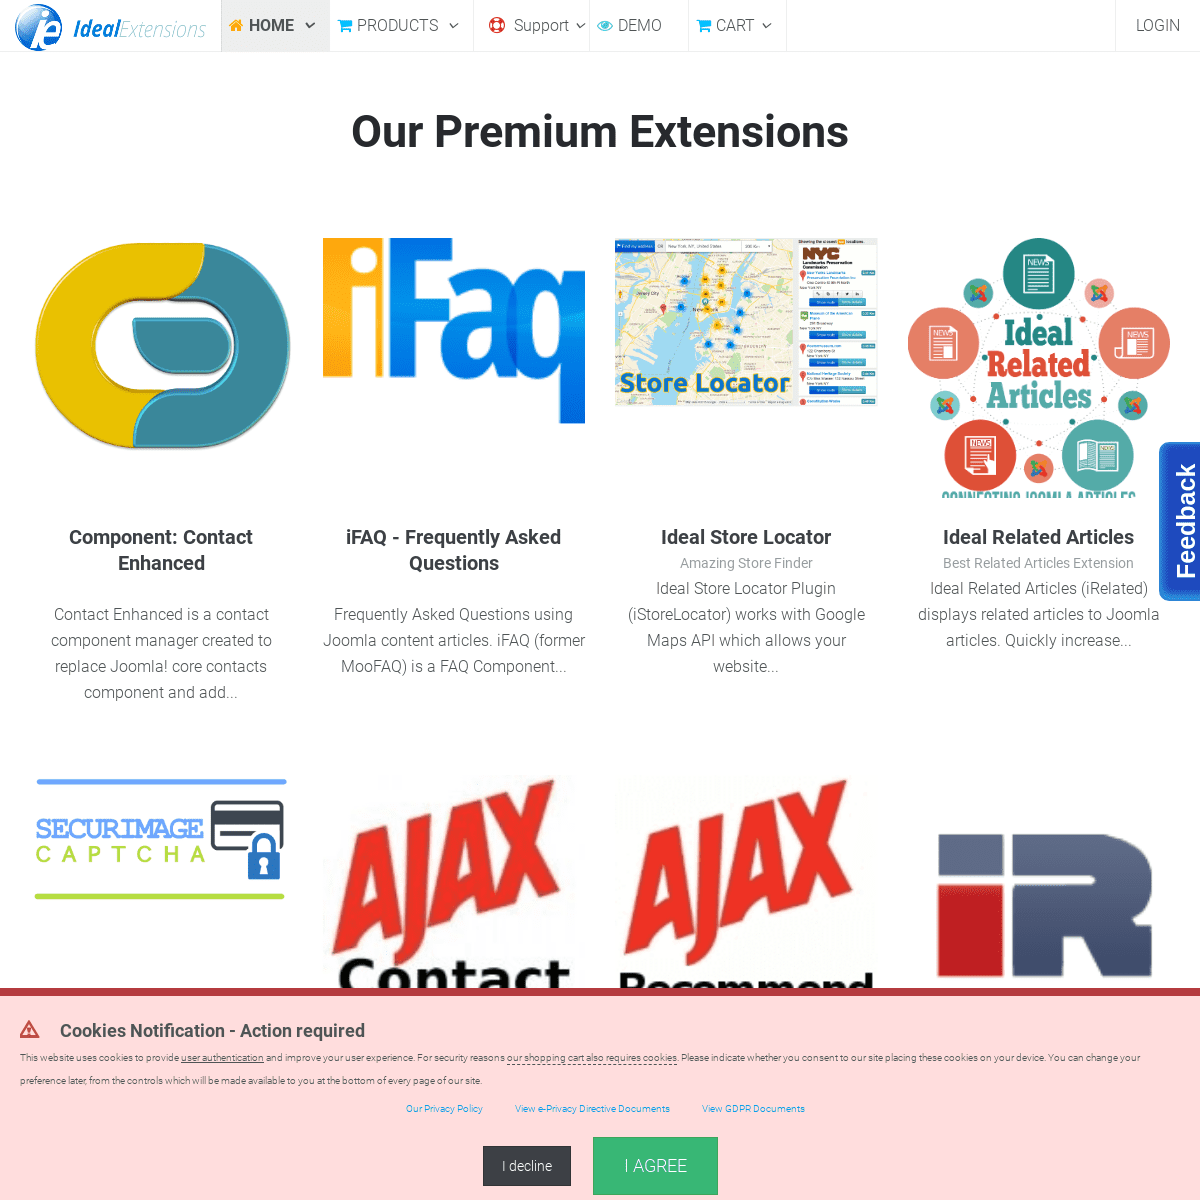 A complete backup of idealextensions.com